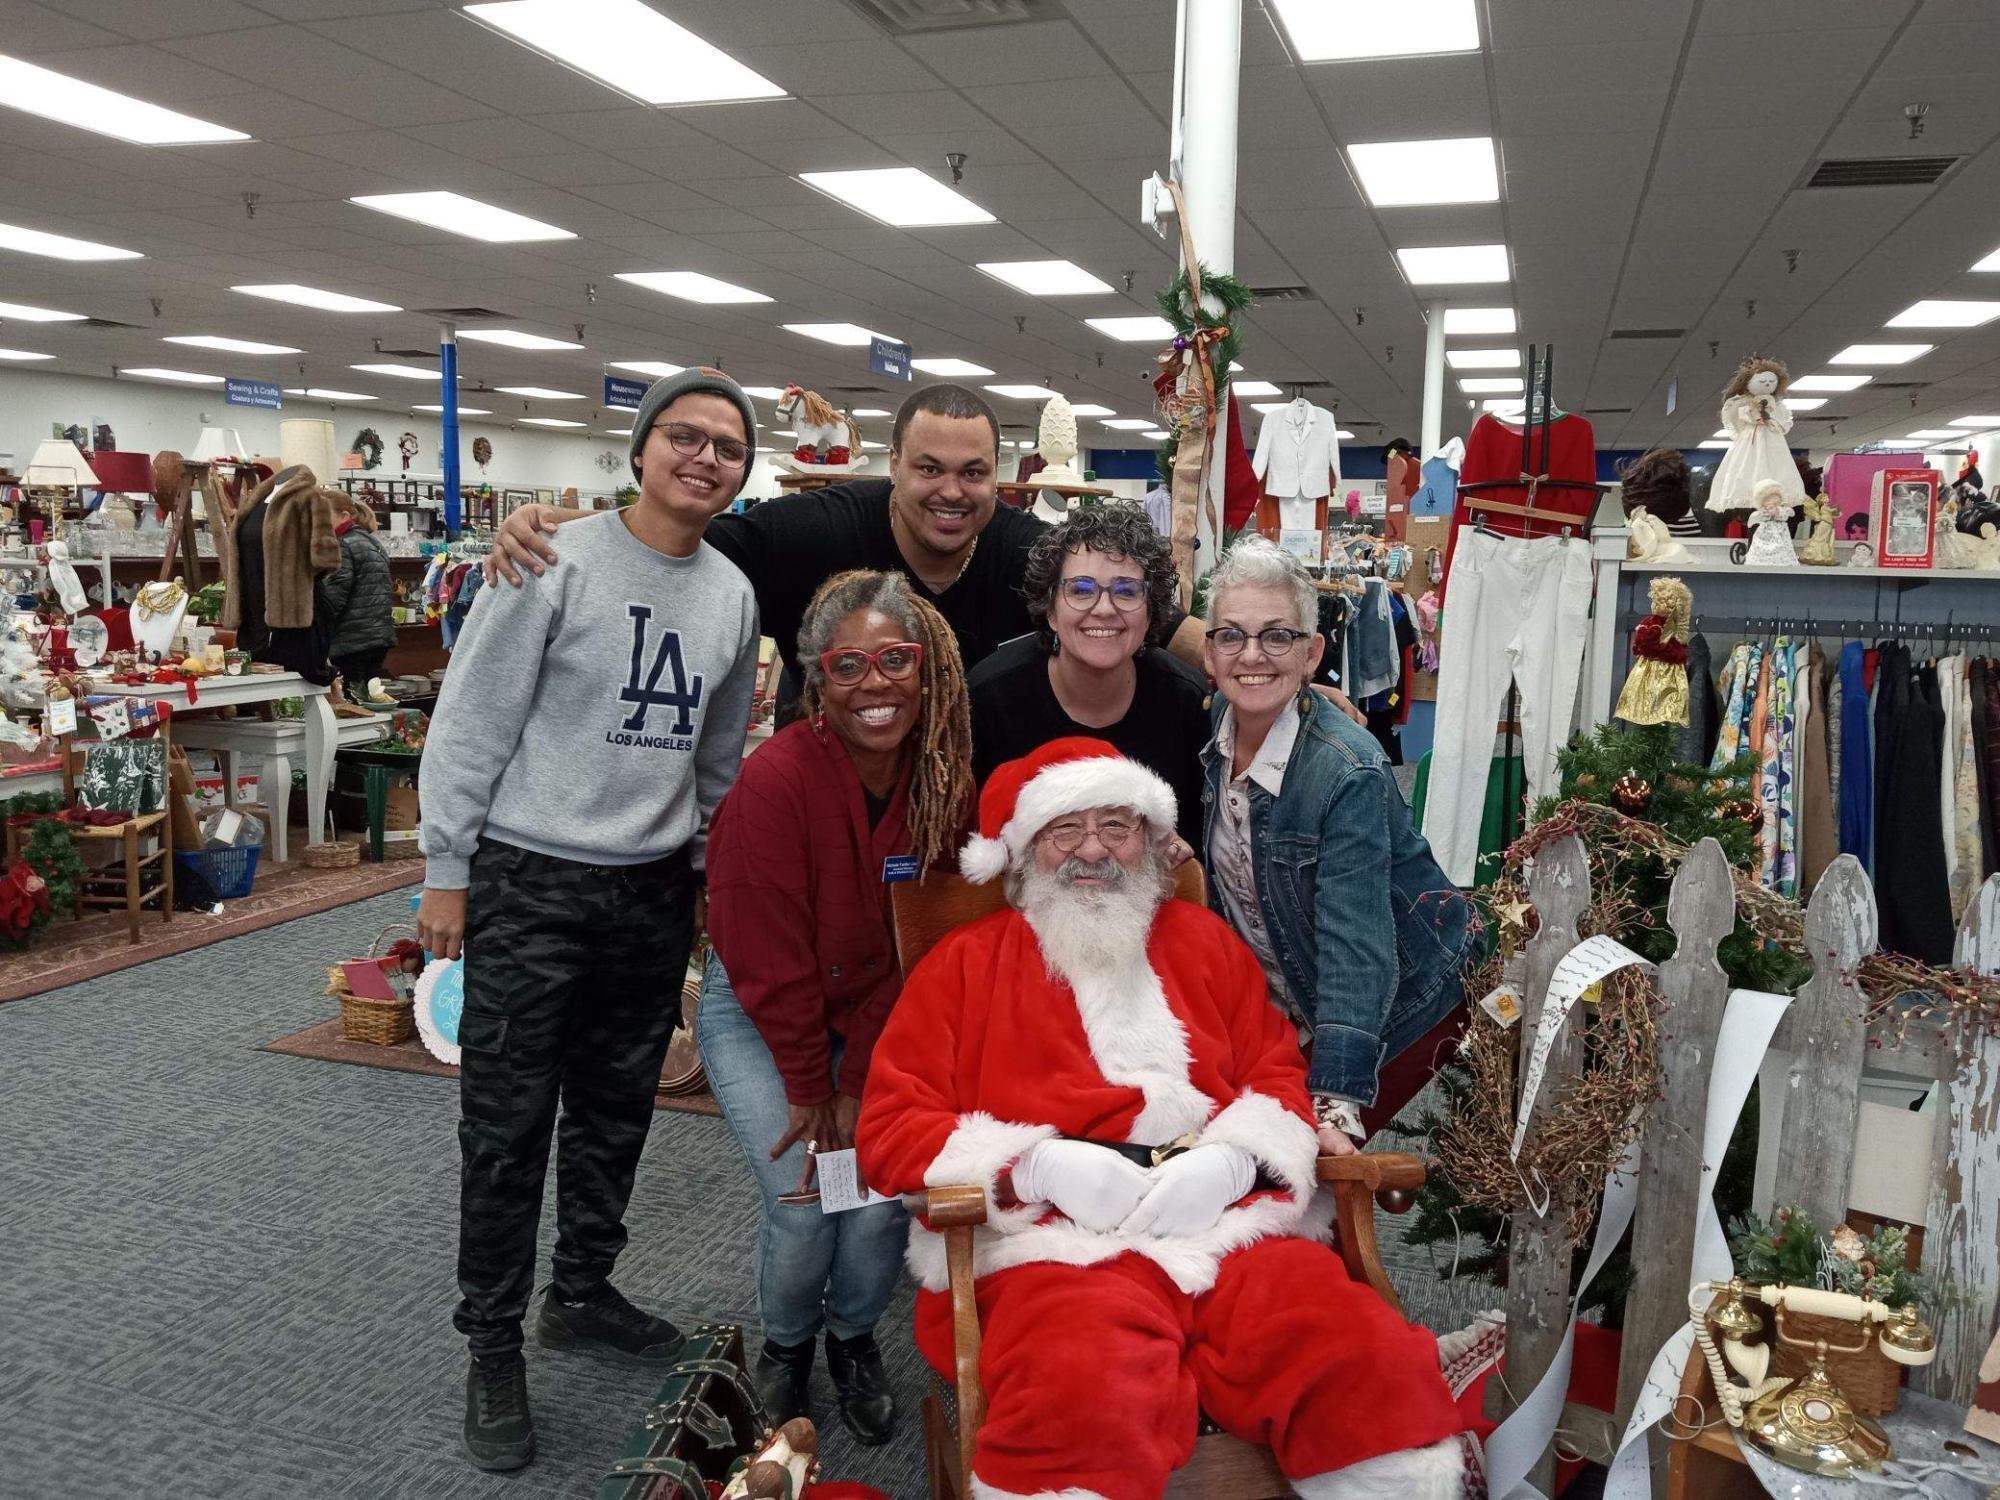 A group of people posing for a photo with Santa Claus